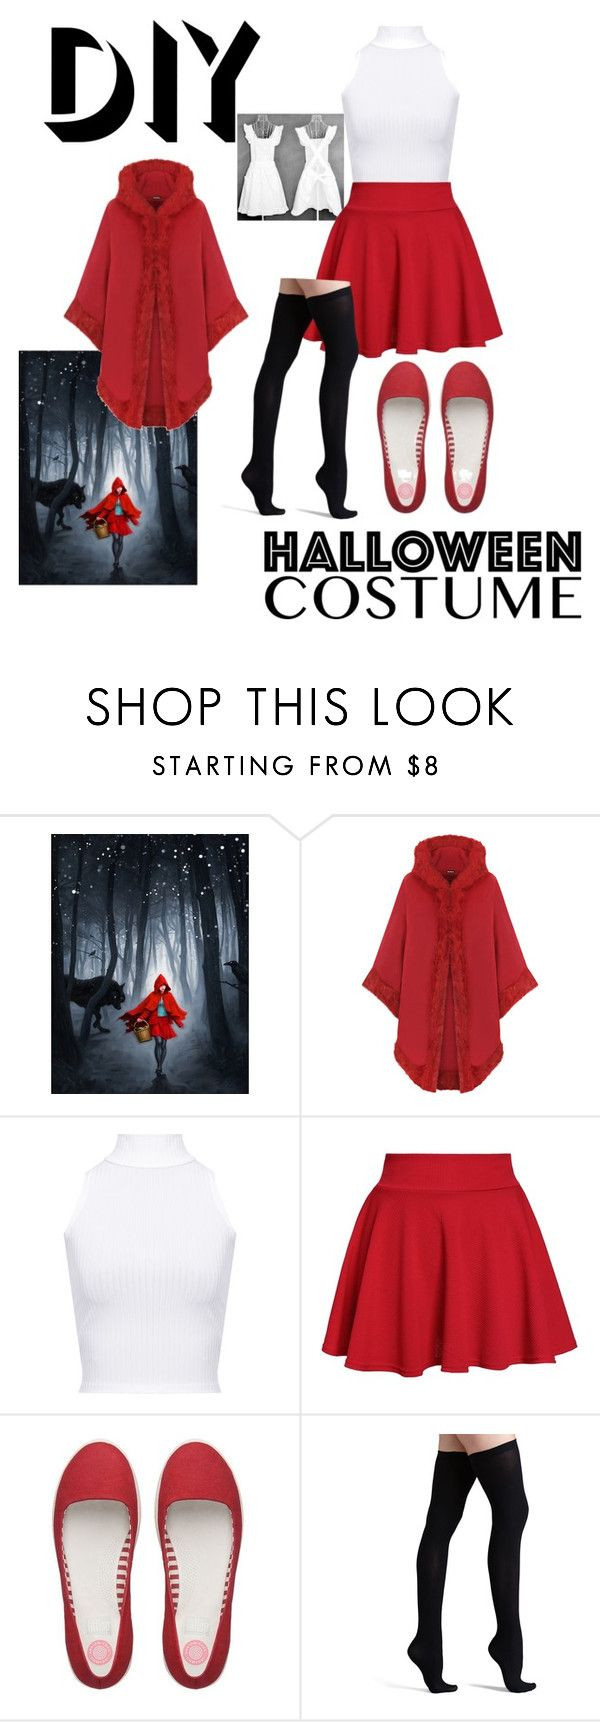 DIY Little Red Riding Hood Costume For Adults
 Diy little red riding hood costume